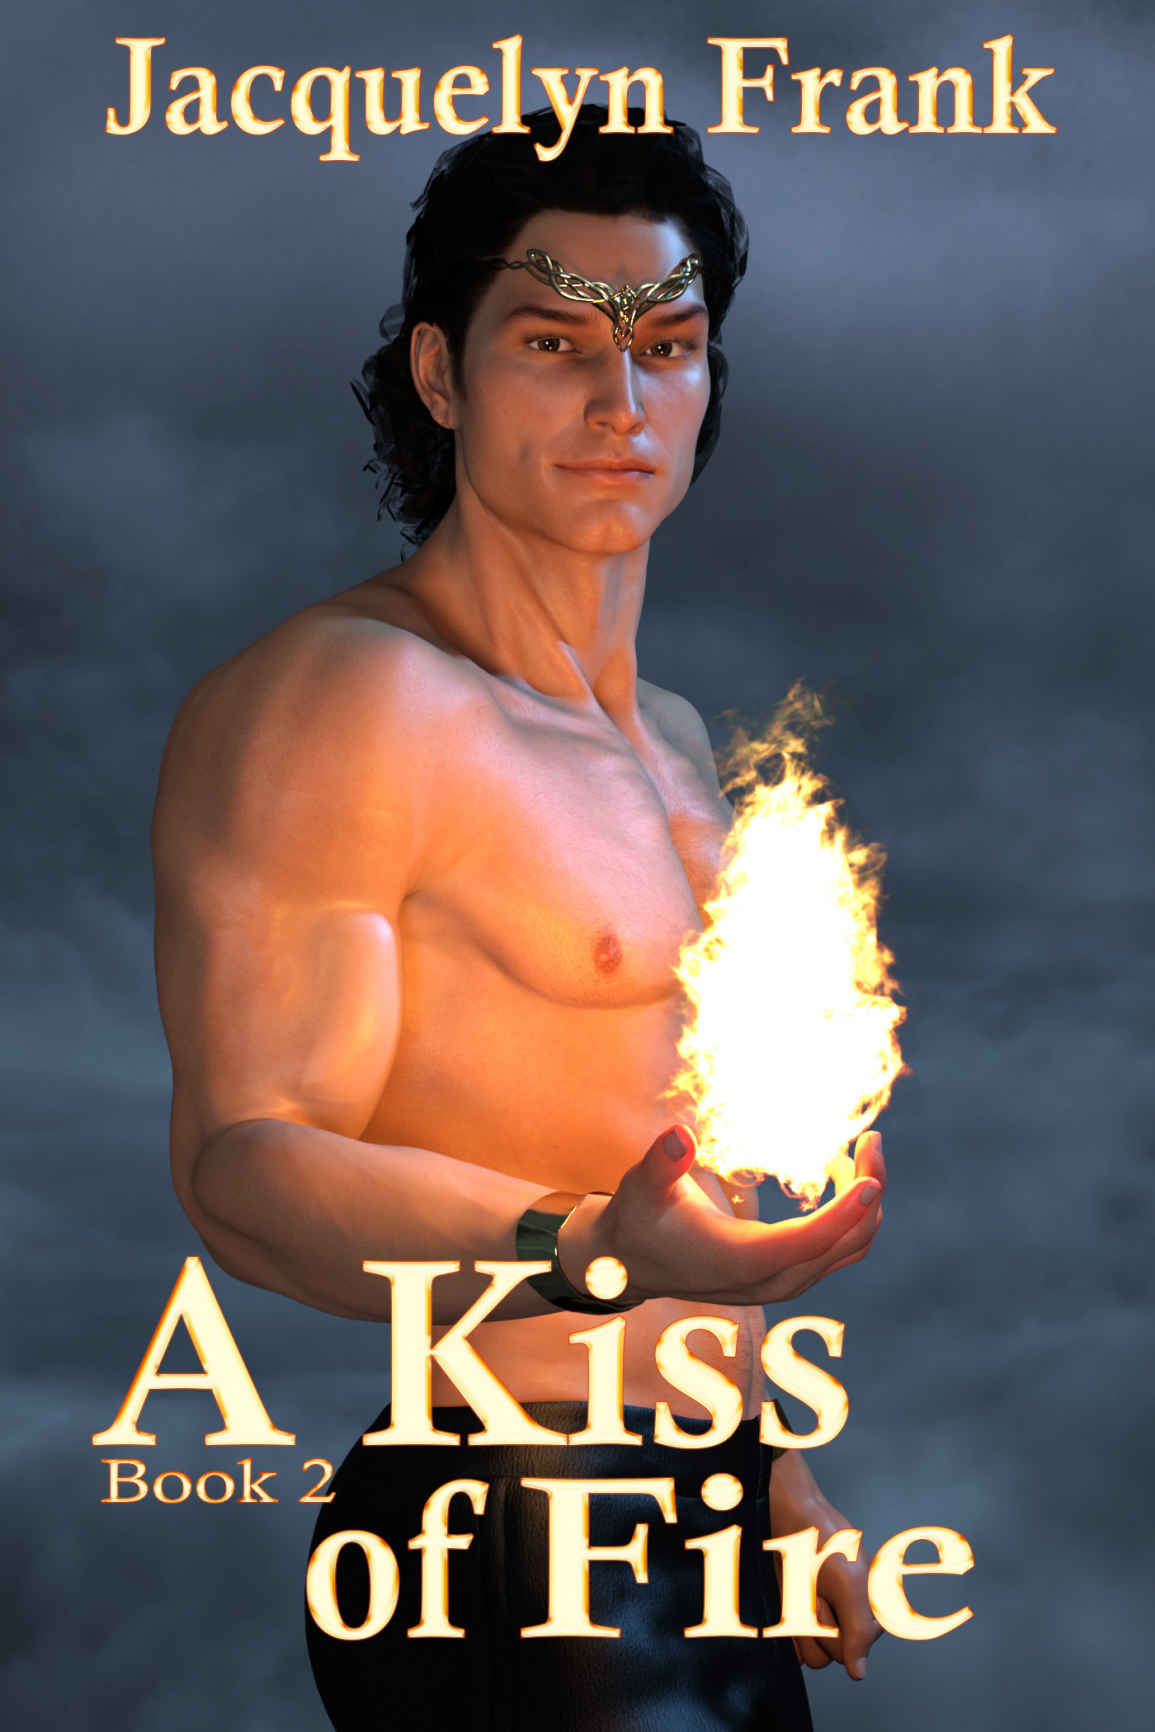 A Kiss of Fire: A Kiss of Magic Book 2 by Jacquelyn Frank